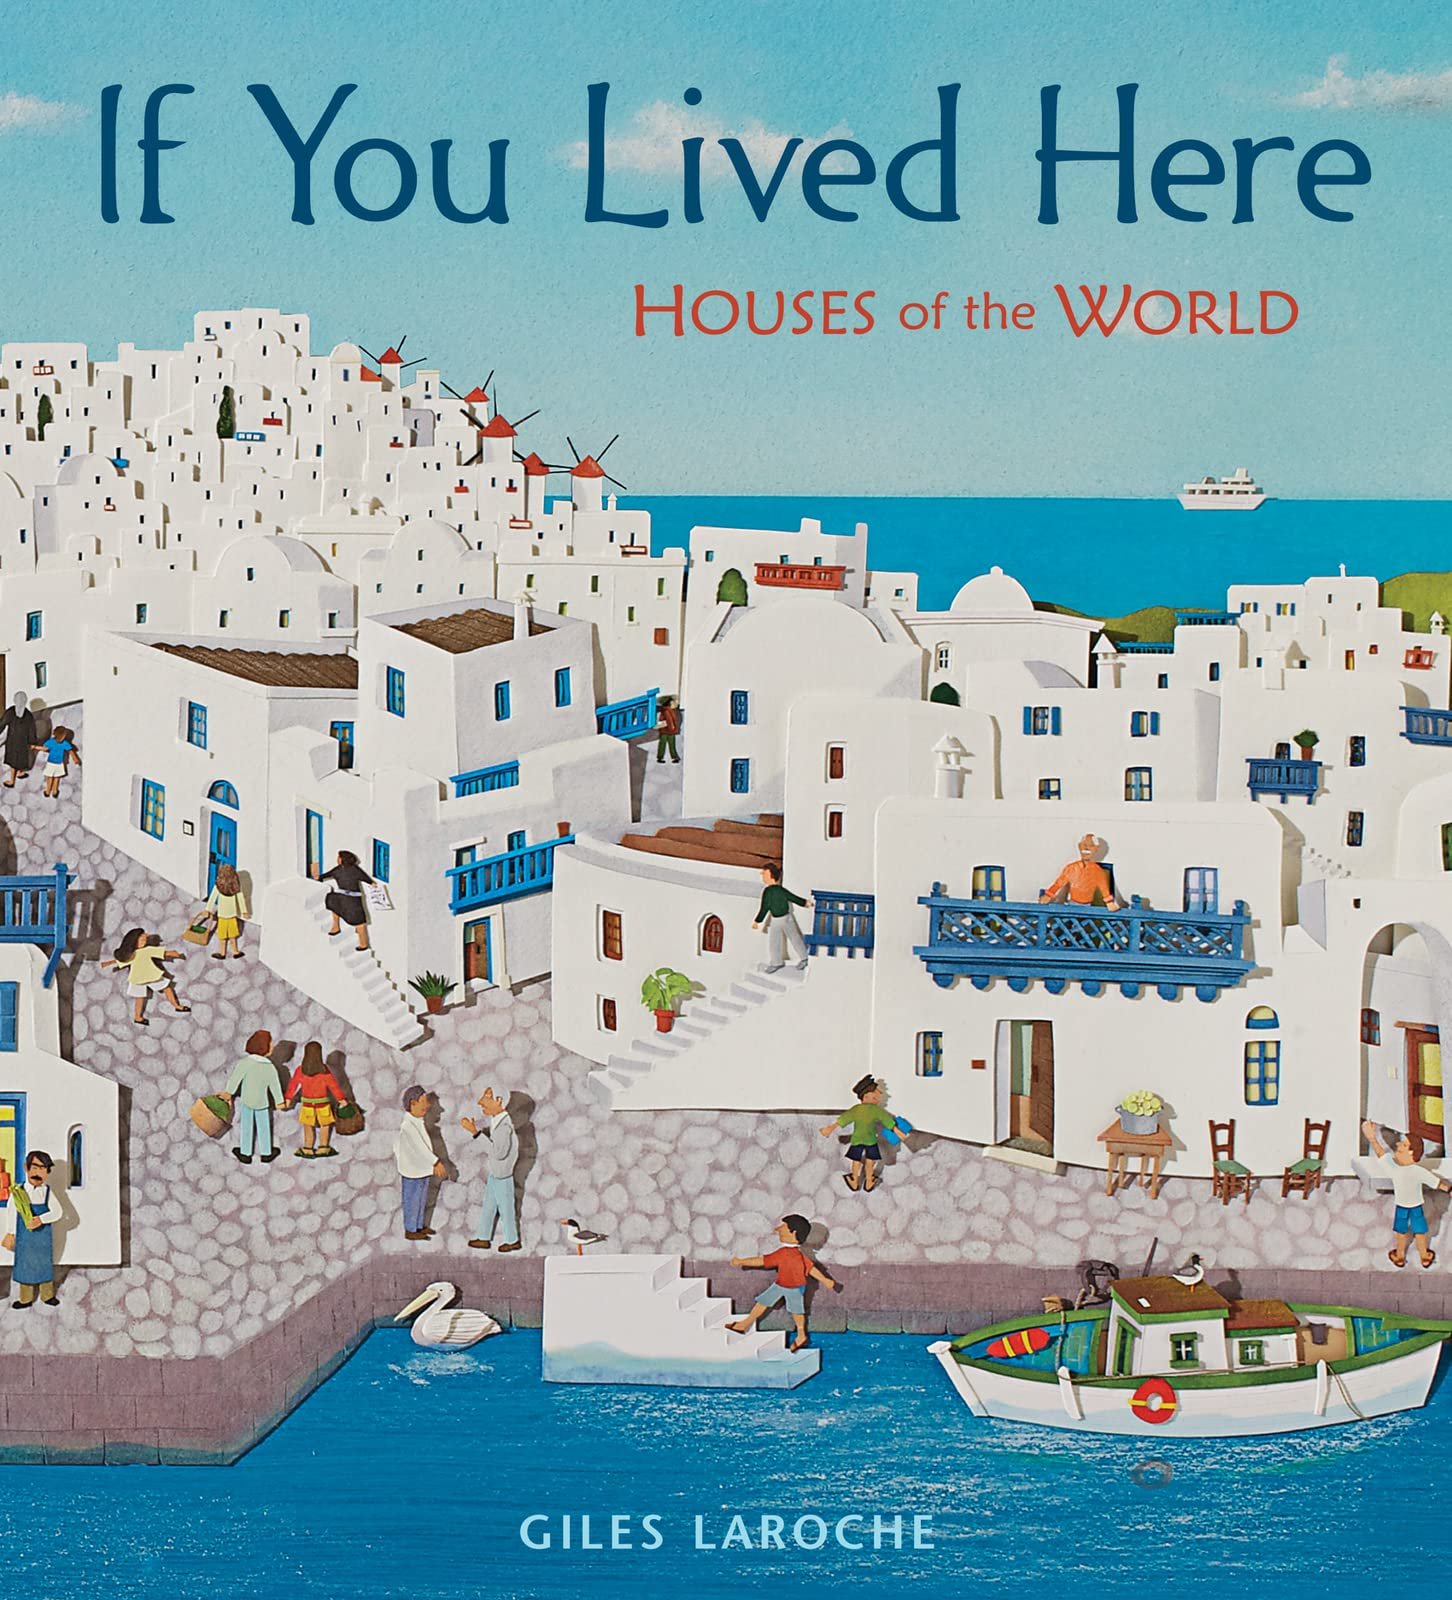 if you lived here - houses of the world - children's book